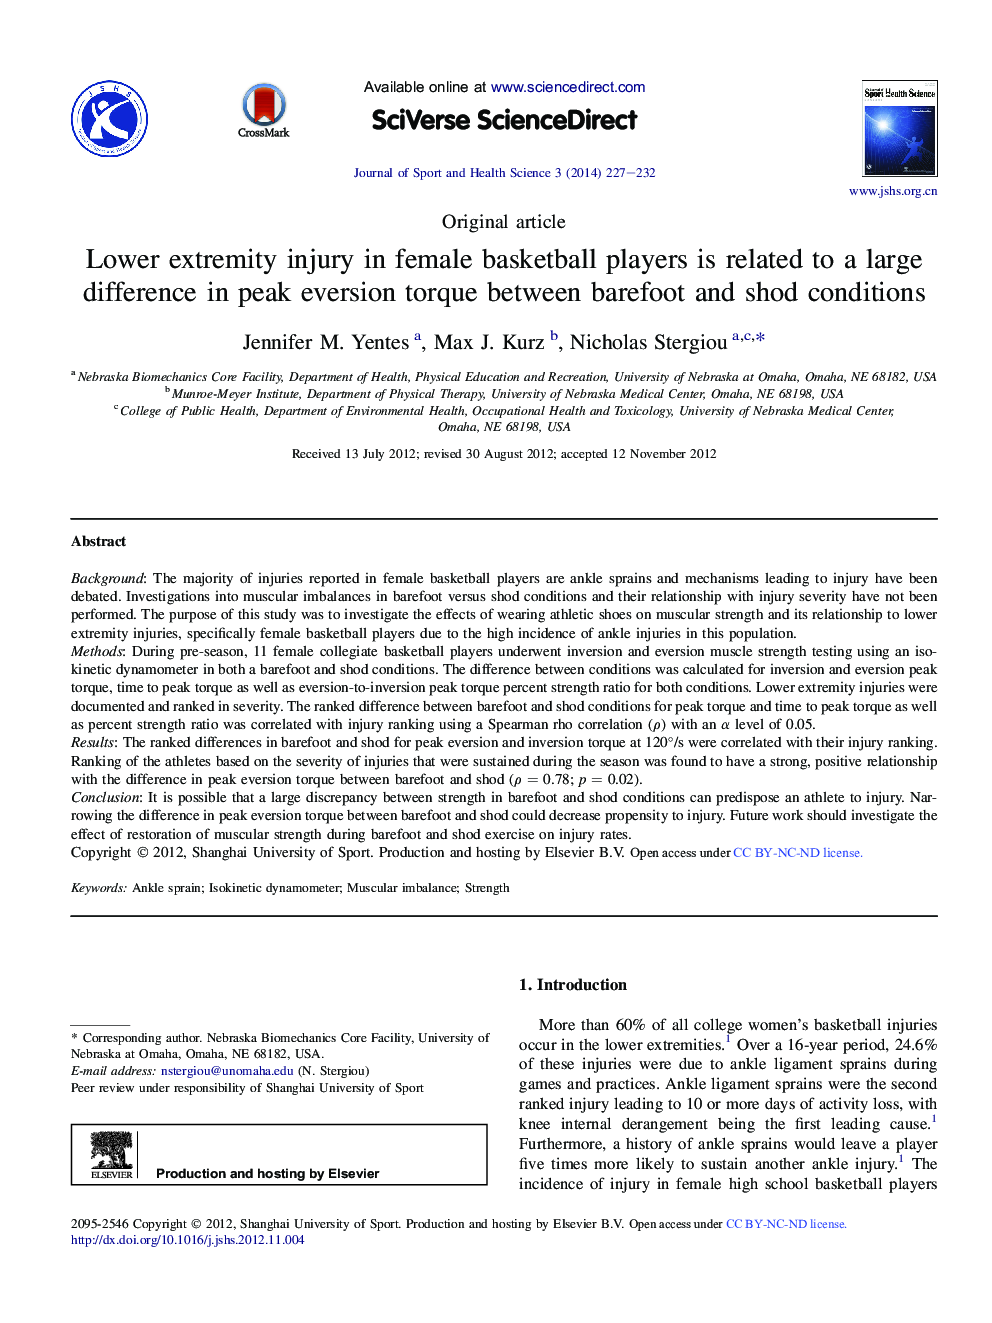 Lower extremity injury in female basketball players is related to a large difference in peak eversion torque between barefoot and shod conditions 